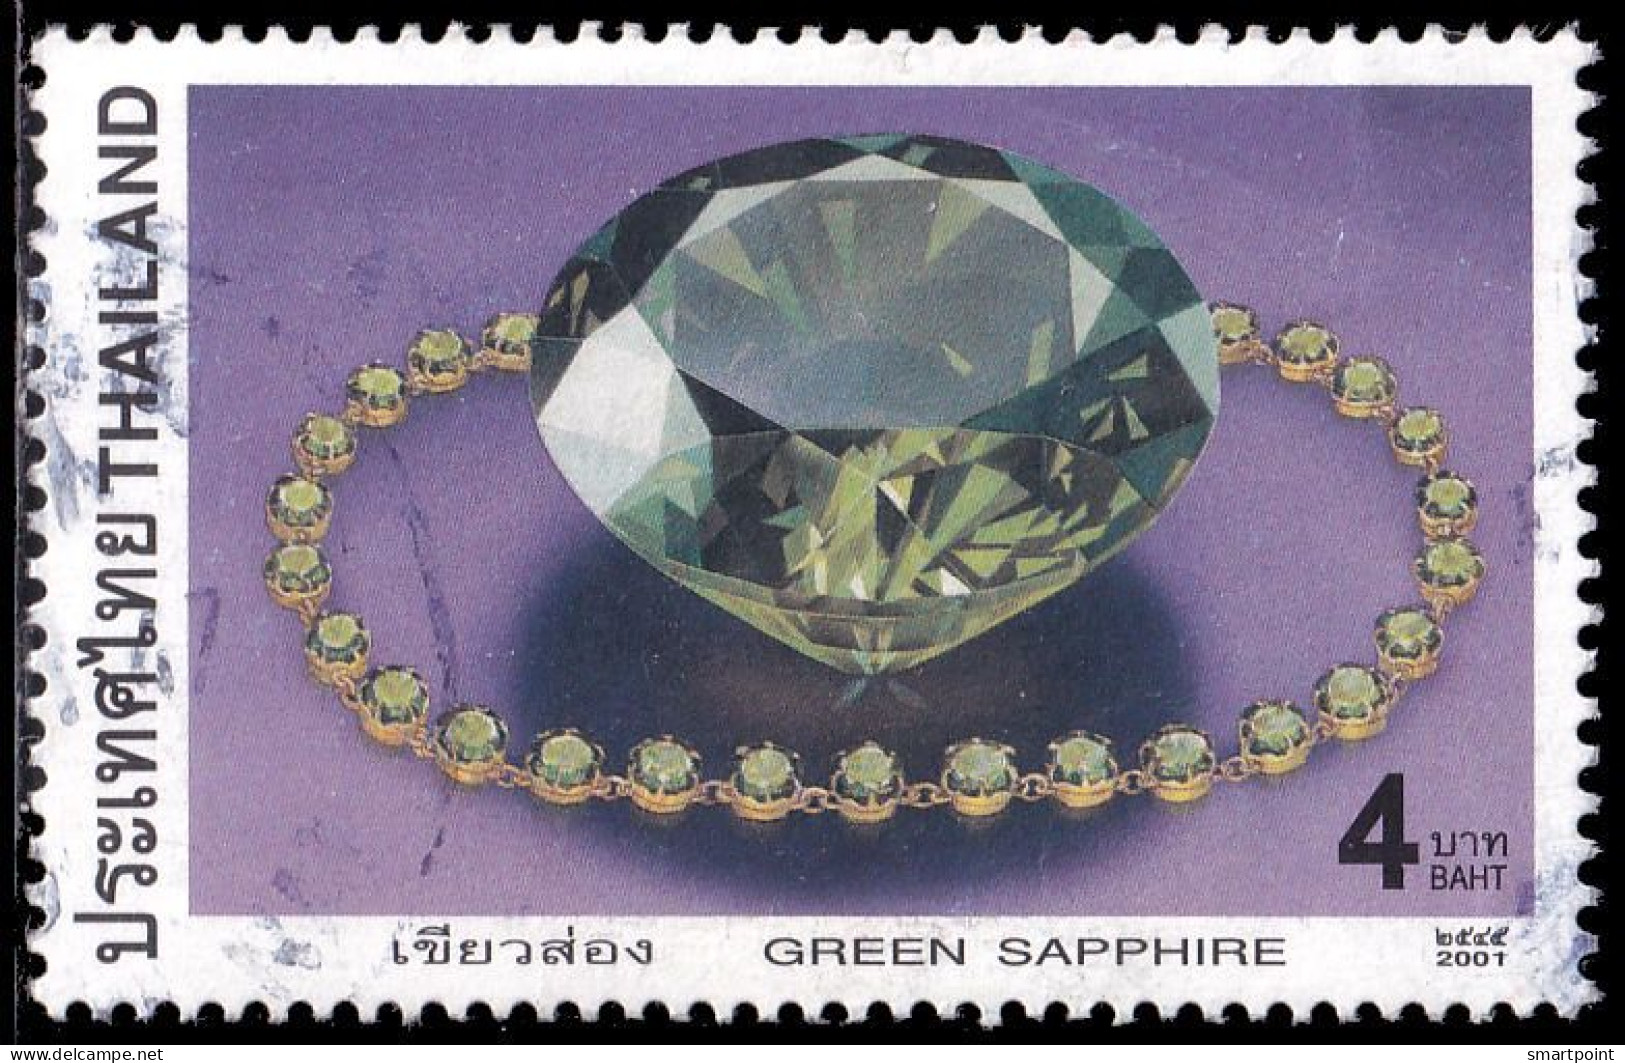 Thailand Stamp 2001 Precious Stones (2nd Series) 4 Baht - Used - Thailand